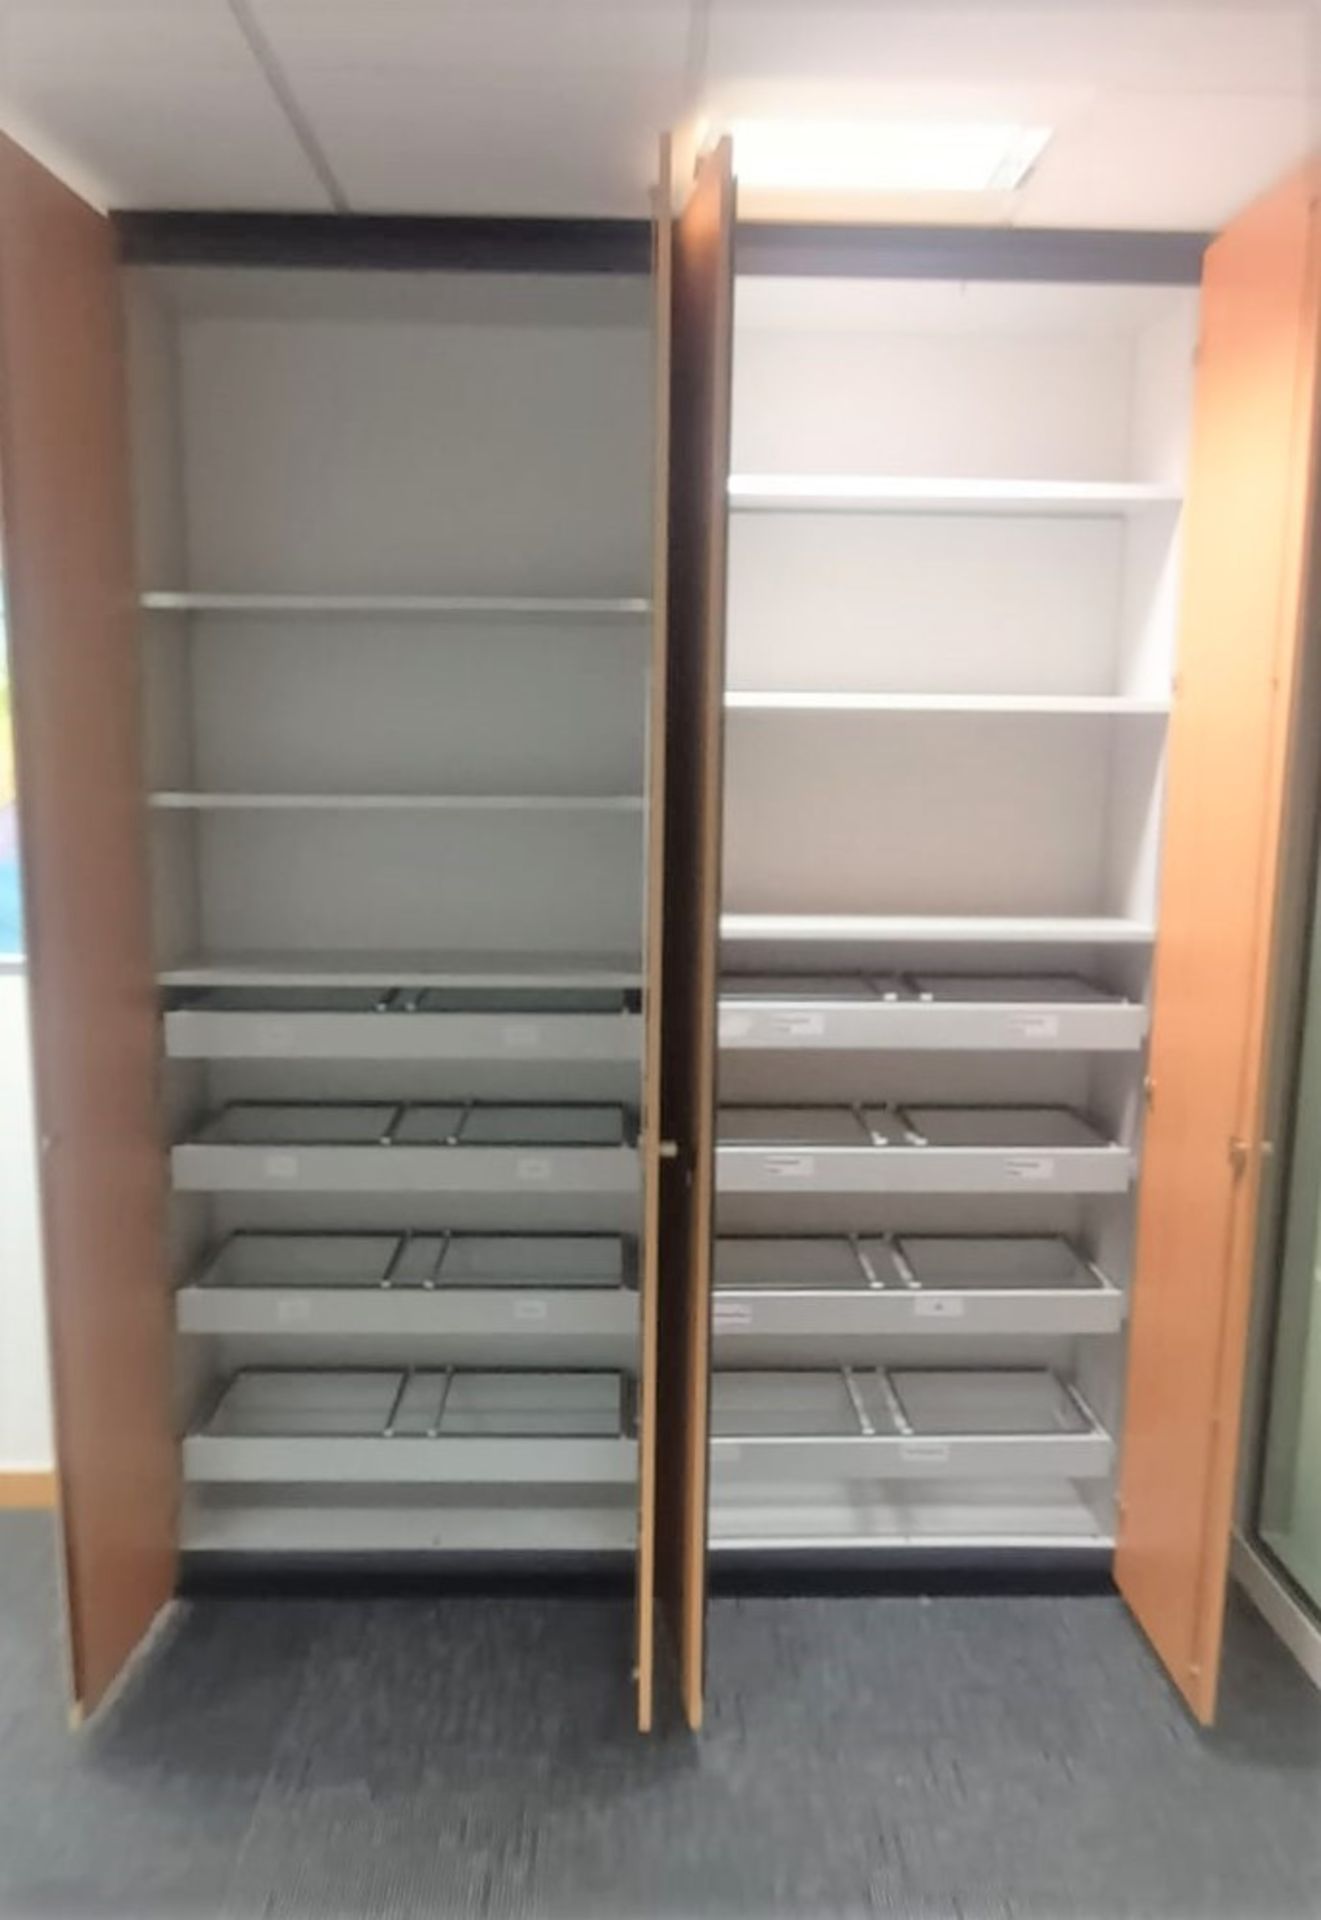 1 x Four Door Office Storage Caninet With Internal Shelves and Pull Out File Organisers - Ref: TV508 - Image 2 of 2